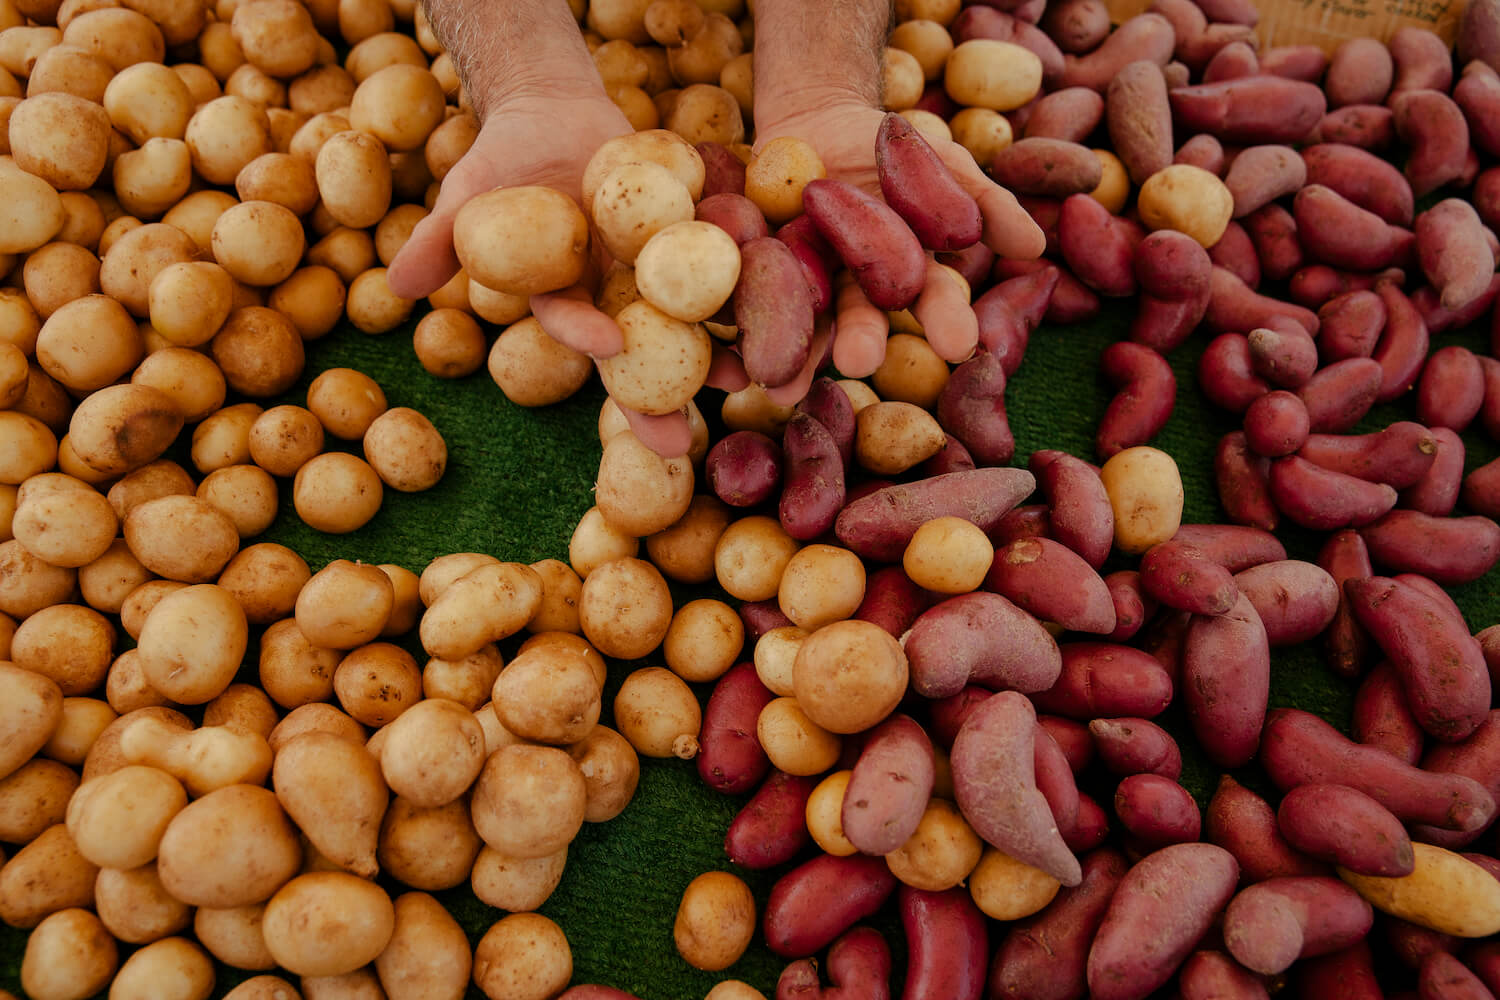 Alex Weiser holds a display of red and yellow potatoes. August 2021